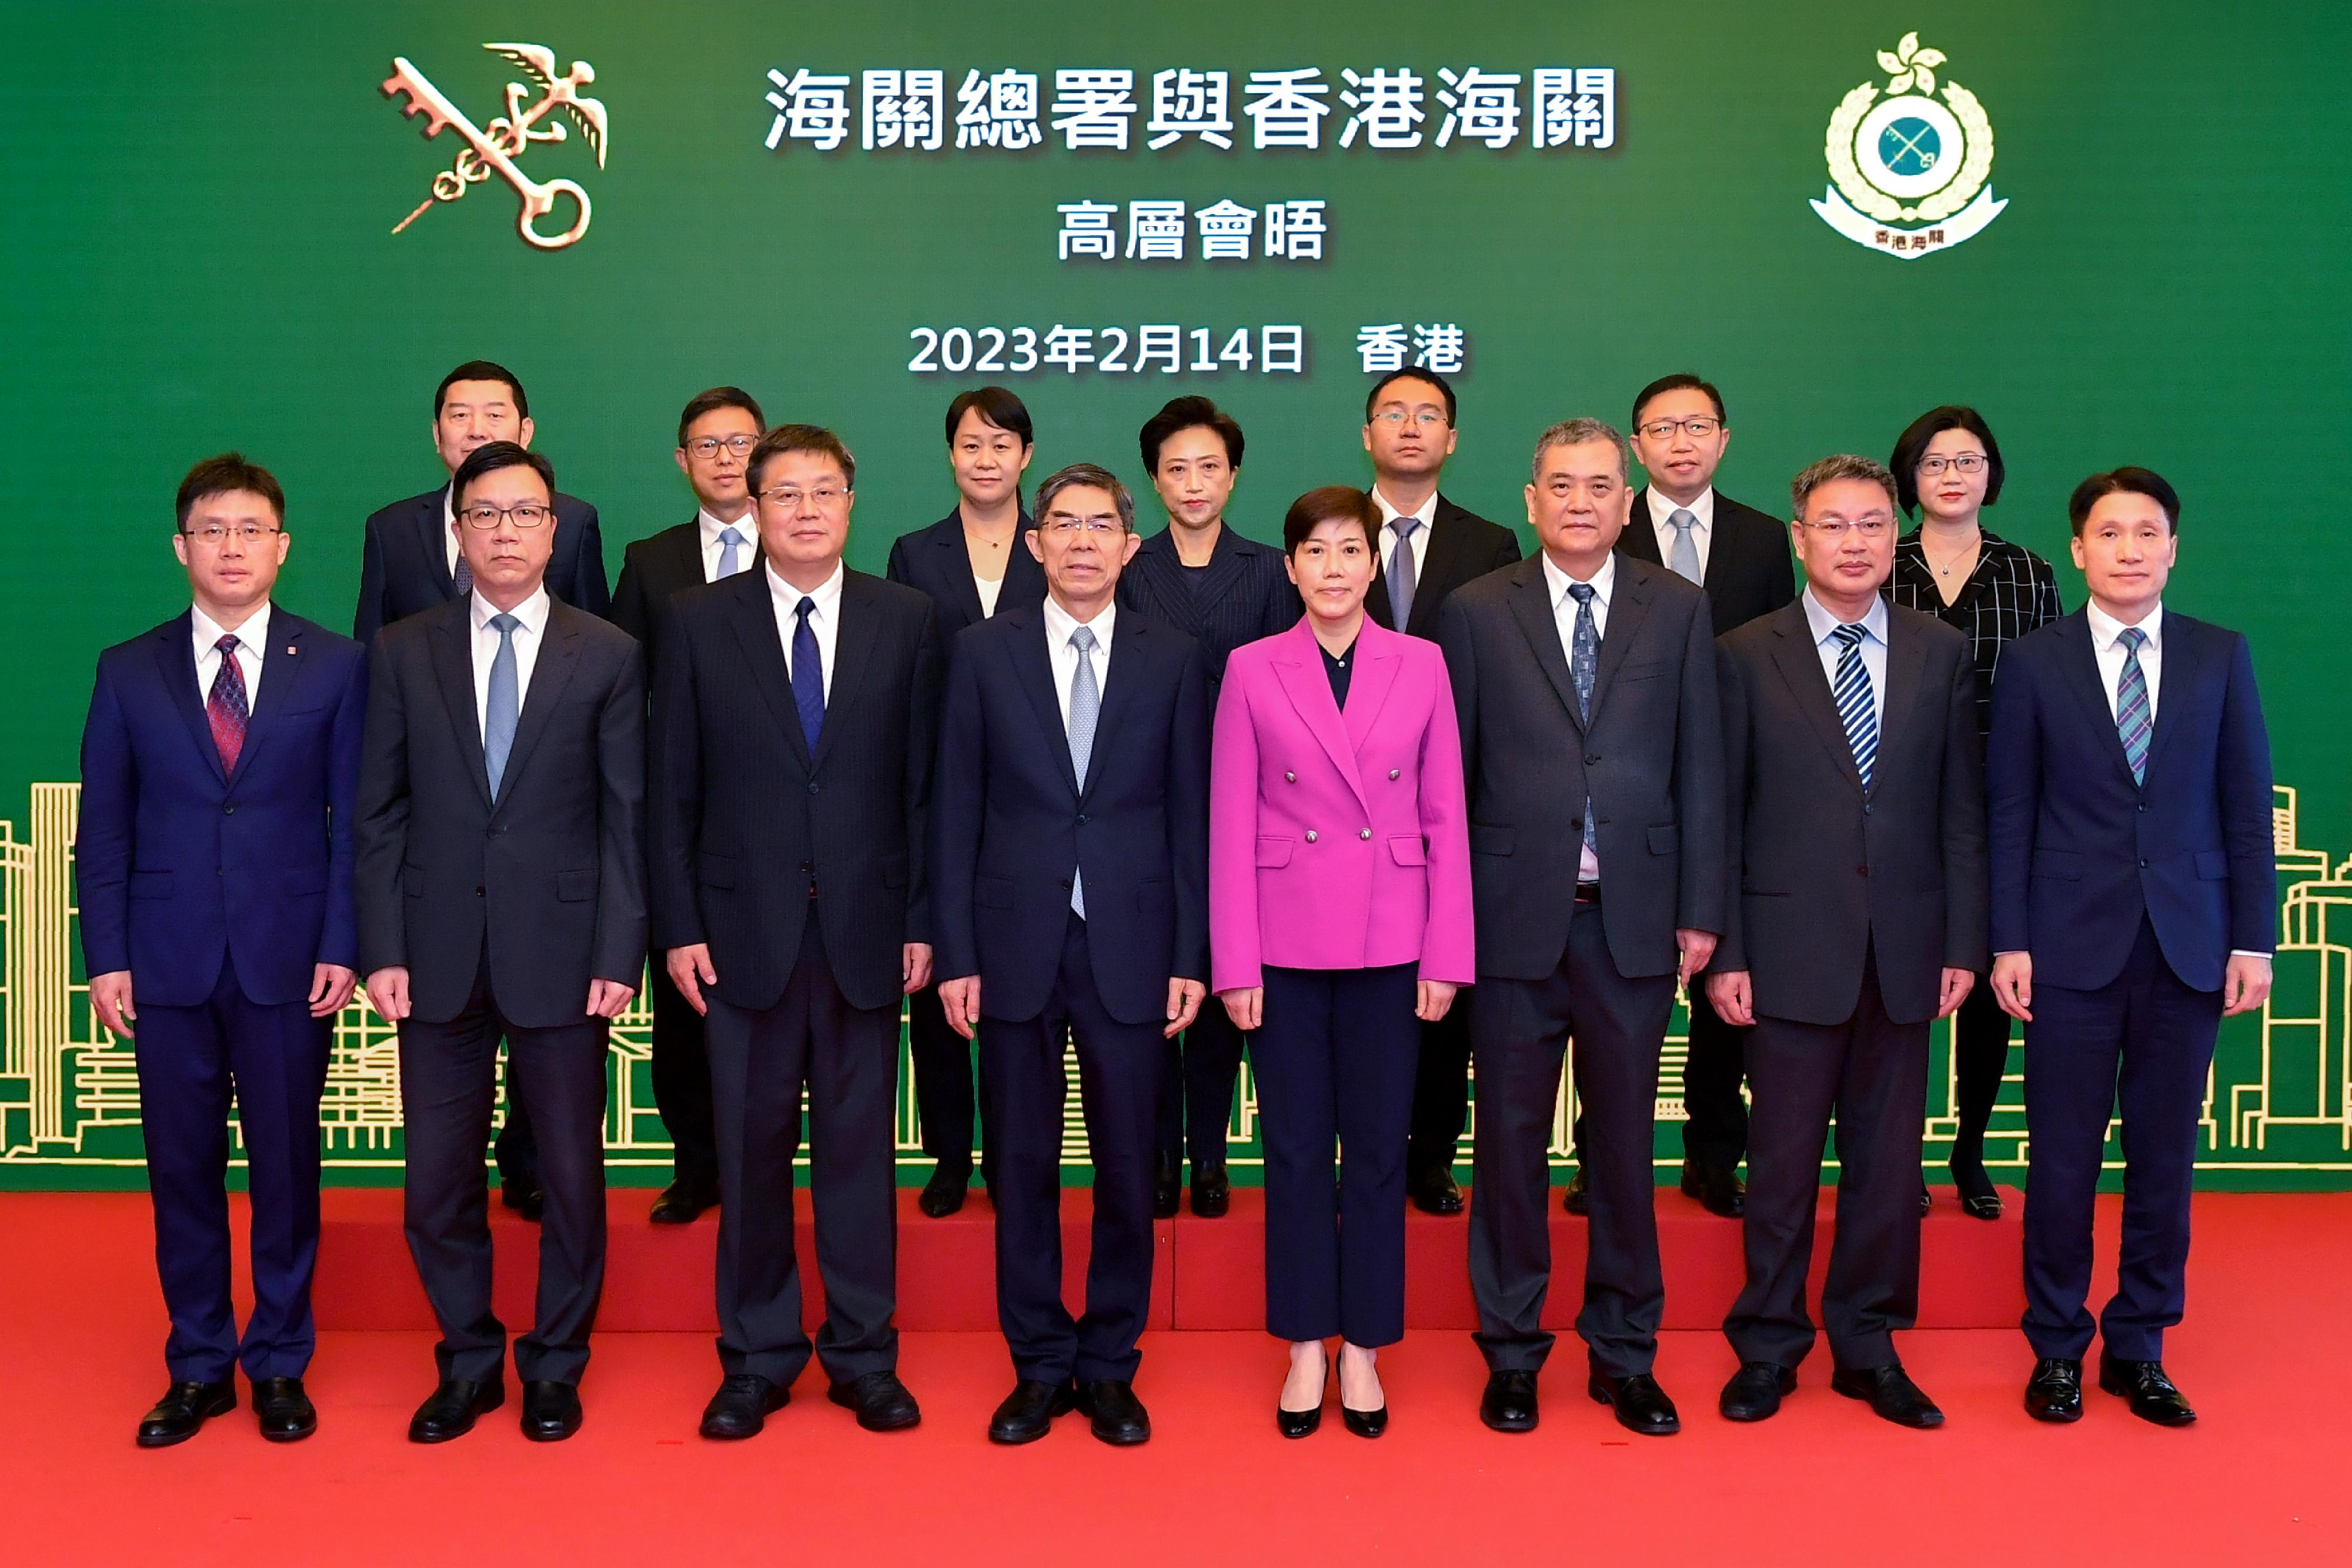 The Commissioner of Customs and Excise, Ms Louise Ho (front row, fourth right), and the Vice-Minister of General Administration of Customs of the People’s Republic of China (GACC), Mr Wang Lingjun (front row, fourth left), signed the Co-operative Arrangement on Deepening Risk Management Co-operation between the GACC and Hong Kong Customs in Hong Kong today (February 14). Other guests attending the signing ceremony include the Deputy Director General of the Department of Finance of the GACC, Mr Xu Mingjie (front row, first left), the Director General of the Department of Commodity Inspection of the GACC, Mr Lin Jiantian (front row, third left), the Chief Engineer of the GACC, Mr Li Wenjian (front row, third right), the Director General of the Department of International Cooperation of the GACC, Mr Zhou Wenyi (front row, second right), the Director of Customs Liaison Division, Police Liaison Department, Liaison Office of the Central People's Government in the Hong Kong Special Administrative Region, Mr Qi Hao (back row, first left), the Director of the Office of Hong Kong, Macao and Taiwan Affairs of the GACC, Ms Zhuang Yan (back row, third left) , the Deputy Director of the General Office of the GACC, Mr Jiang Zhitao (back row, third right) and other senior officials of the Hong Kong Customs.